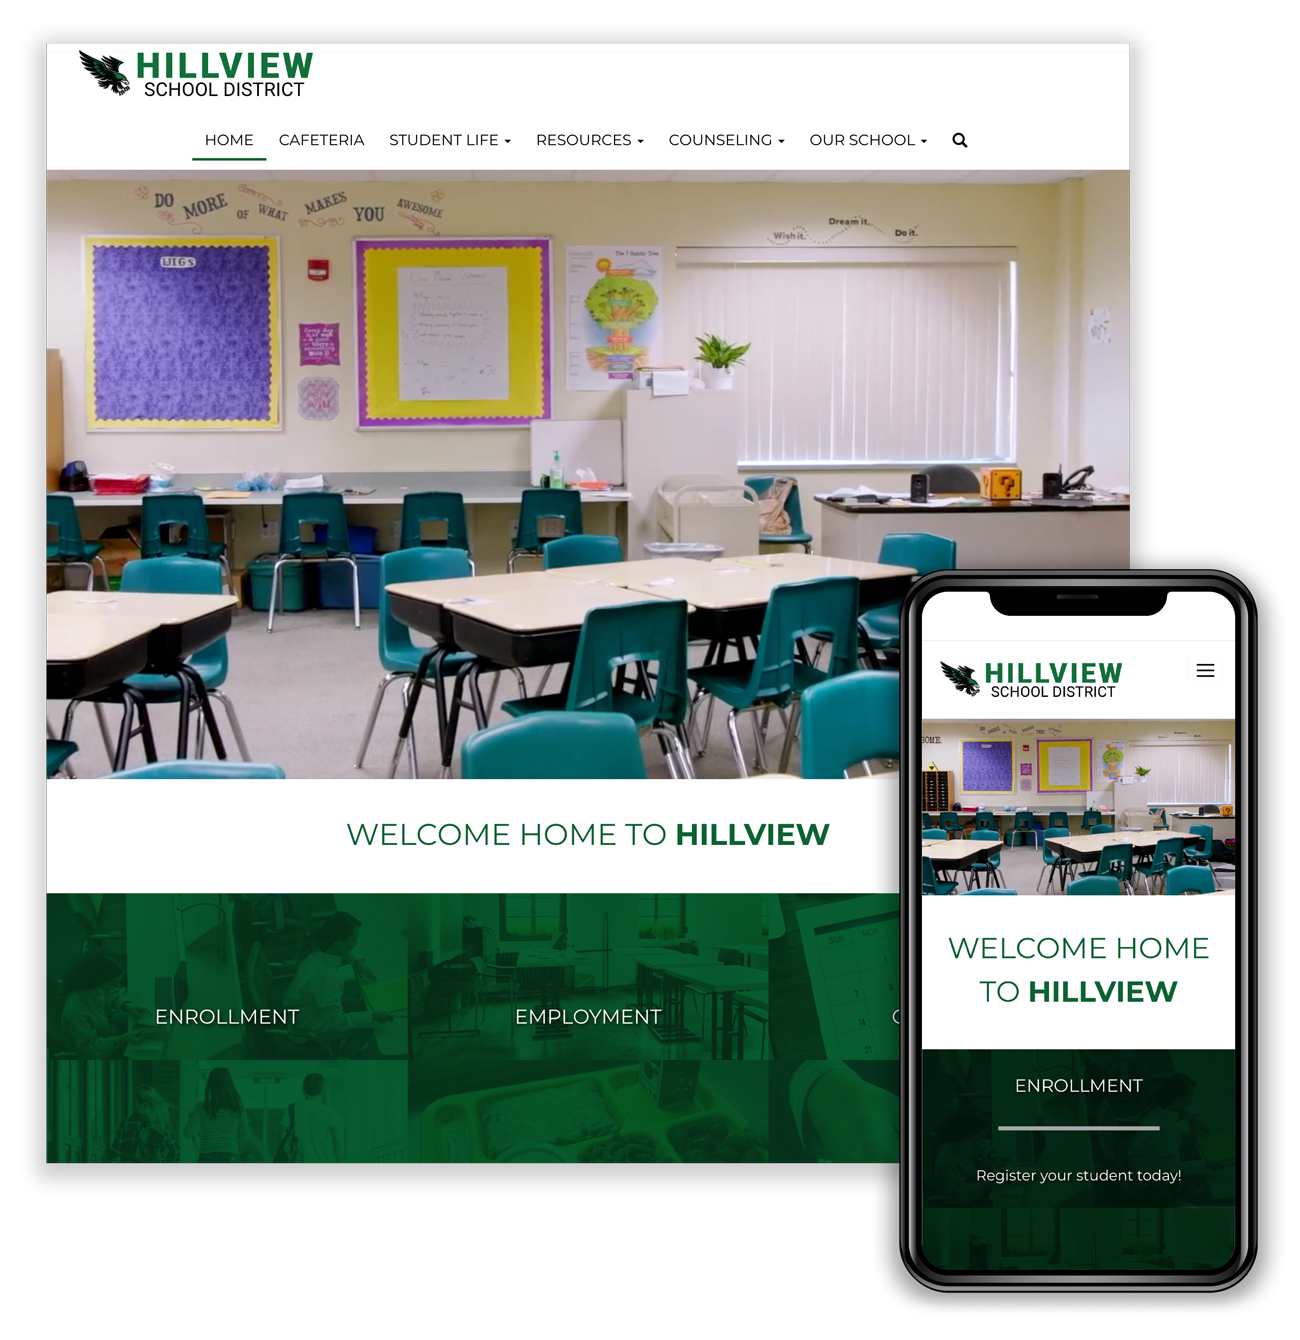 Hillview School District example Smart Site on web and mobile